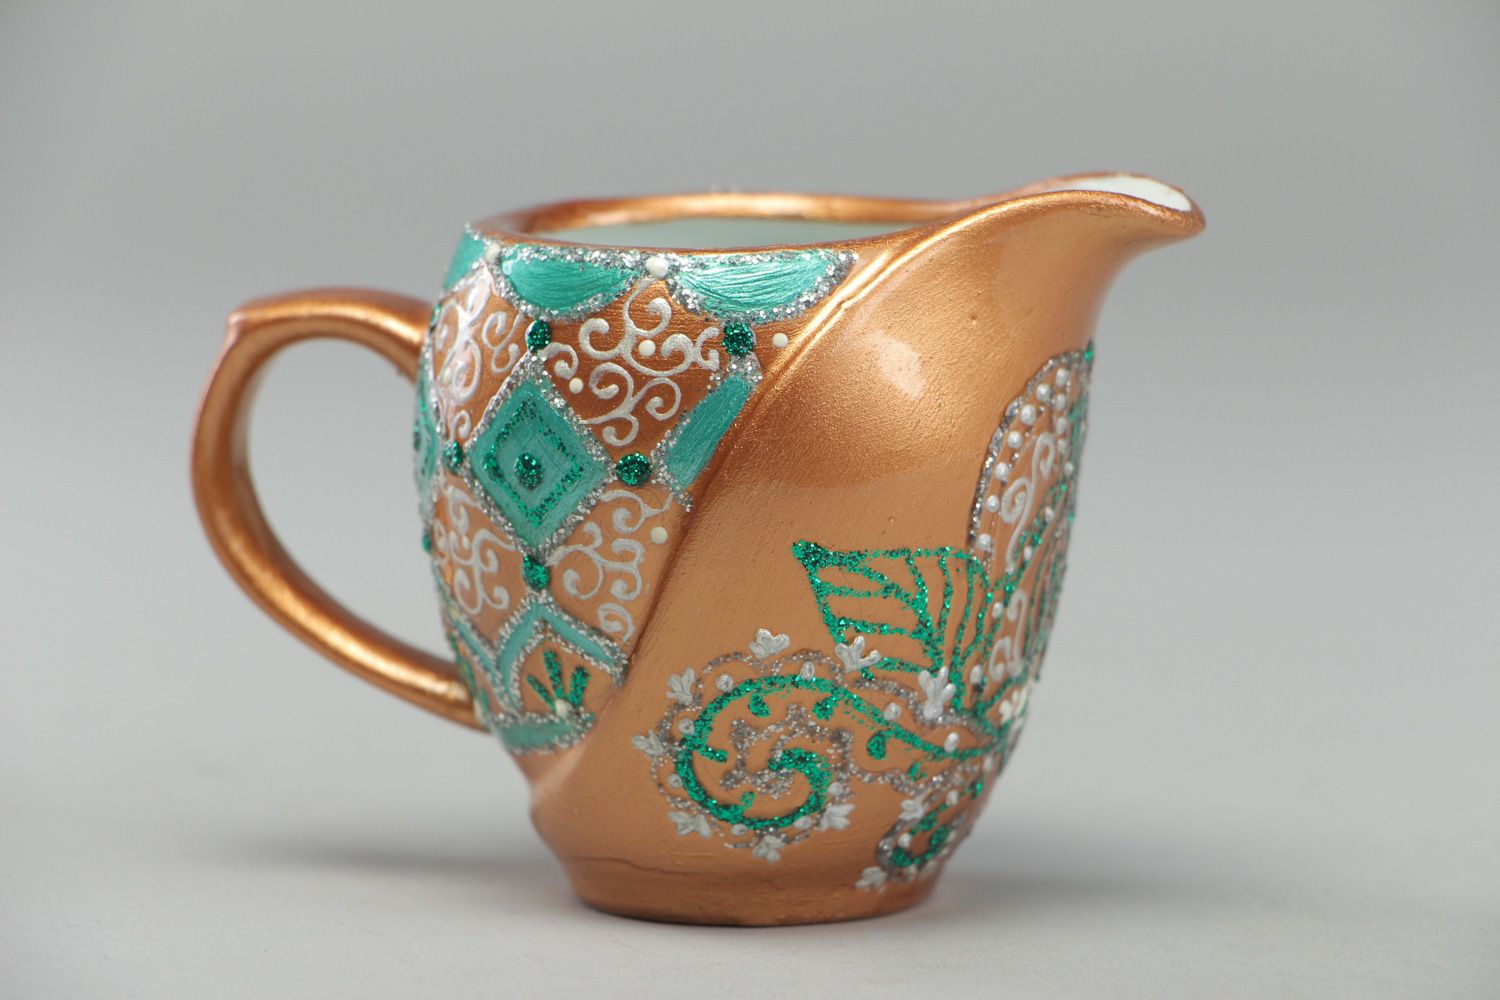 5 oz hand-painted creamer pitcher in gold and green colors 0,25 lb photo 1